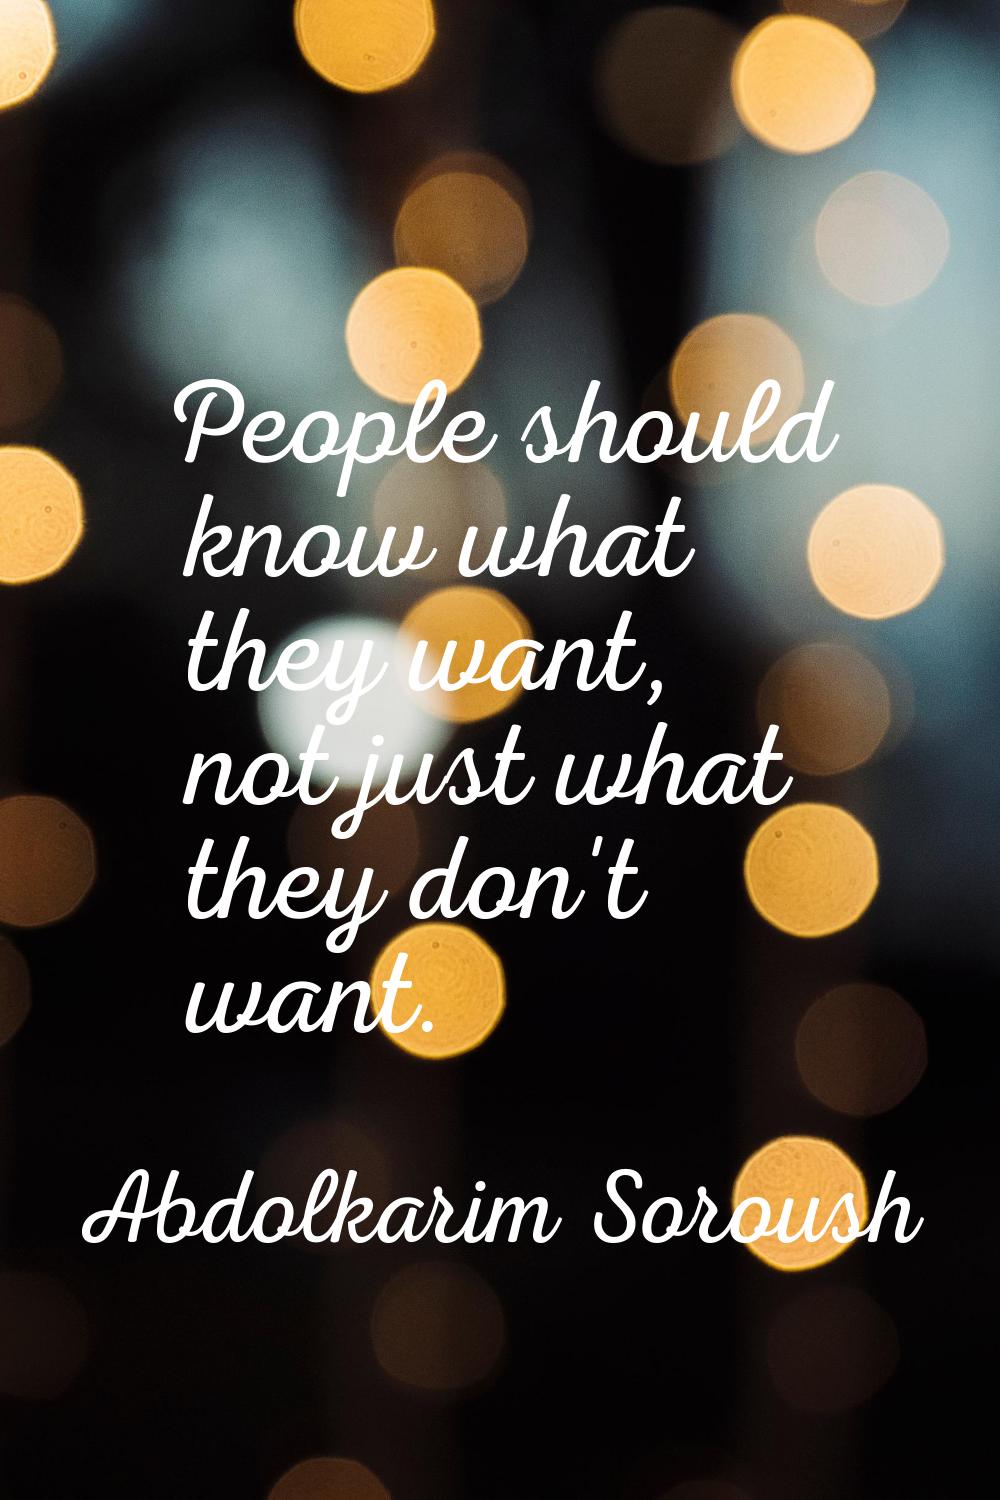 People should know what they want, not just what they don't want.